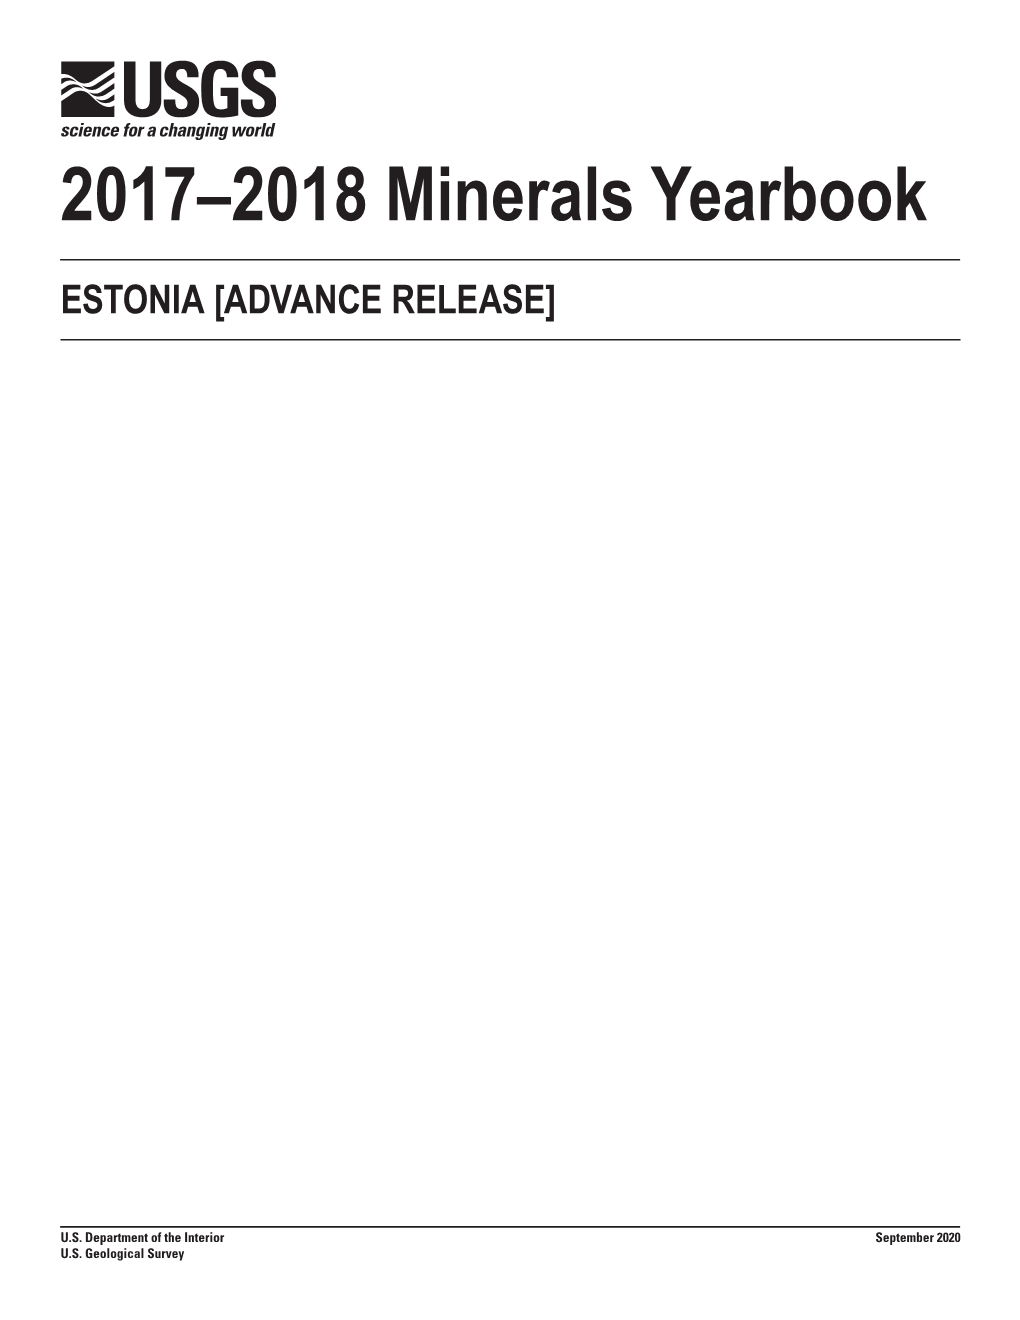 The Mineral Industry of Estonia in 2016